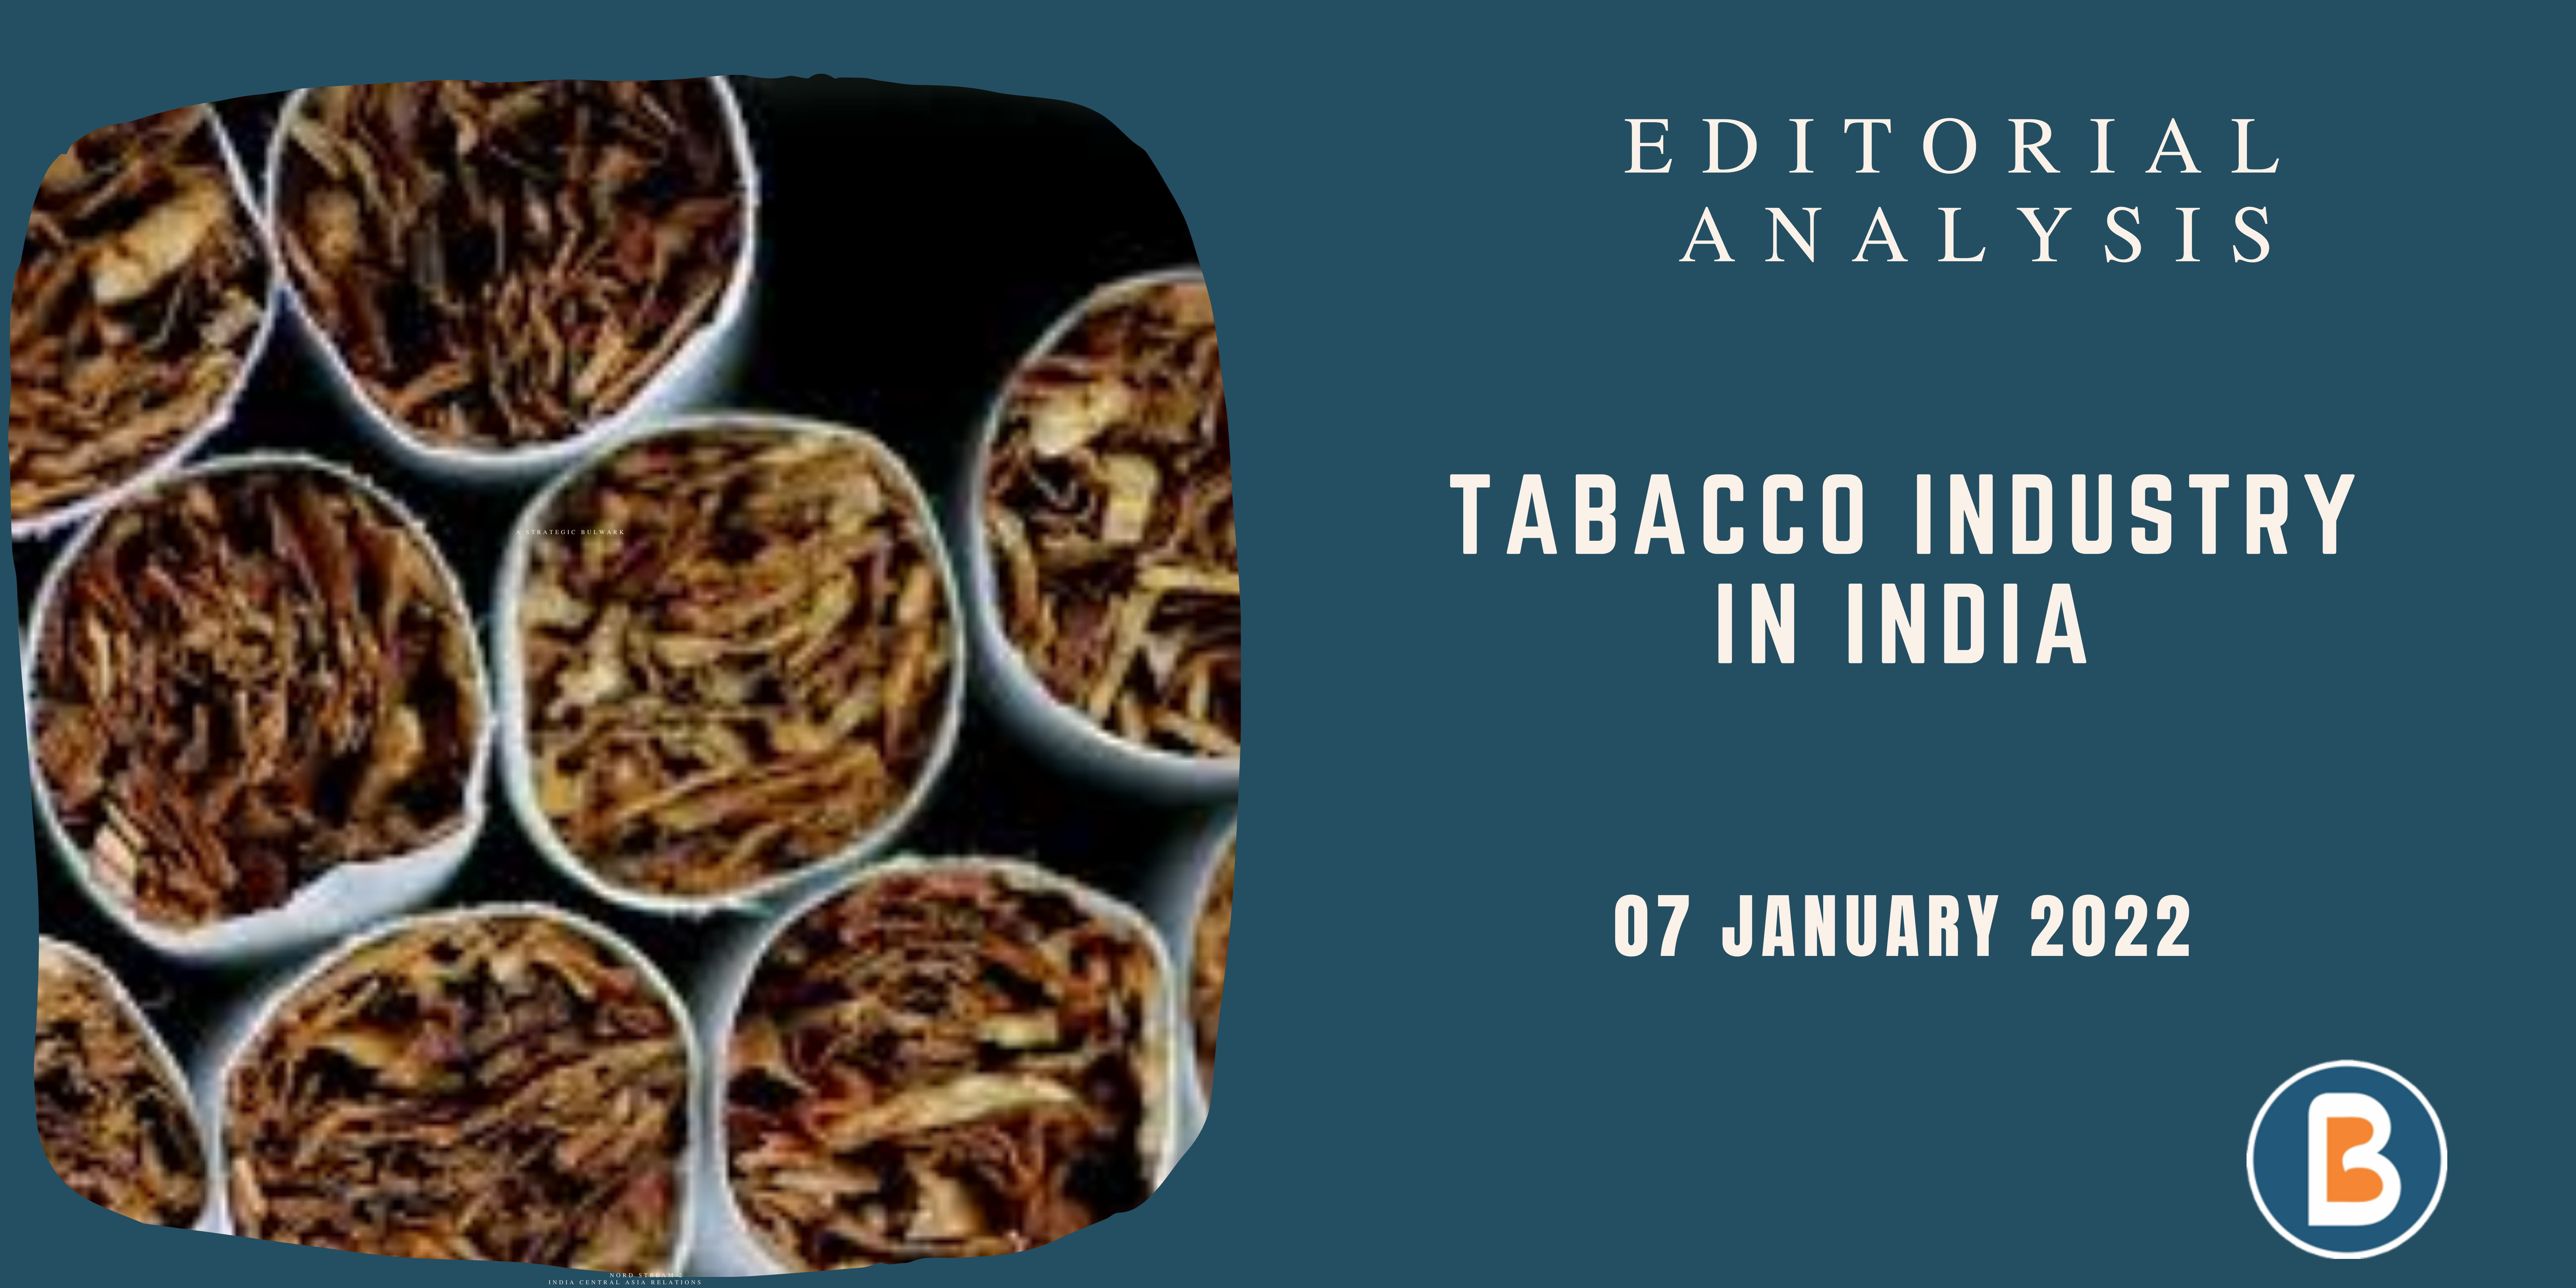 Editorial Analysis for UPSC - TOBACCO INDUSTRY IN INDIA